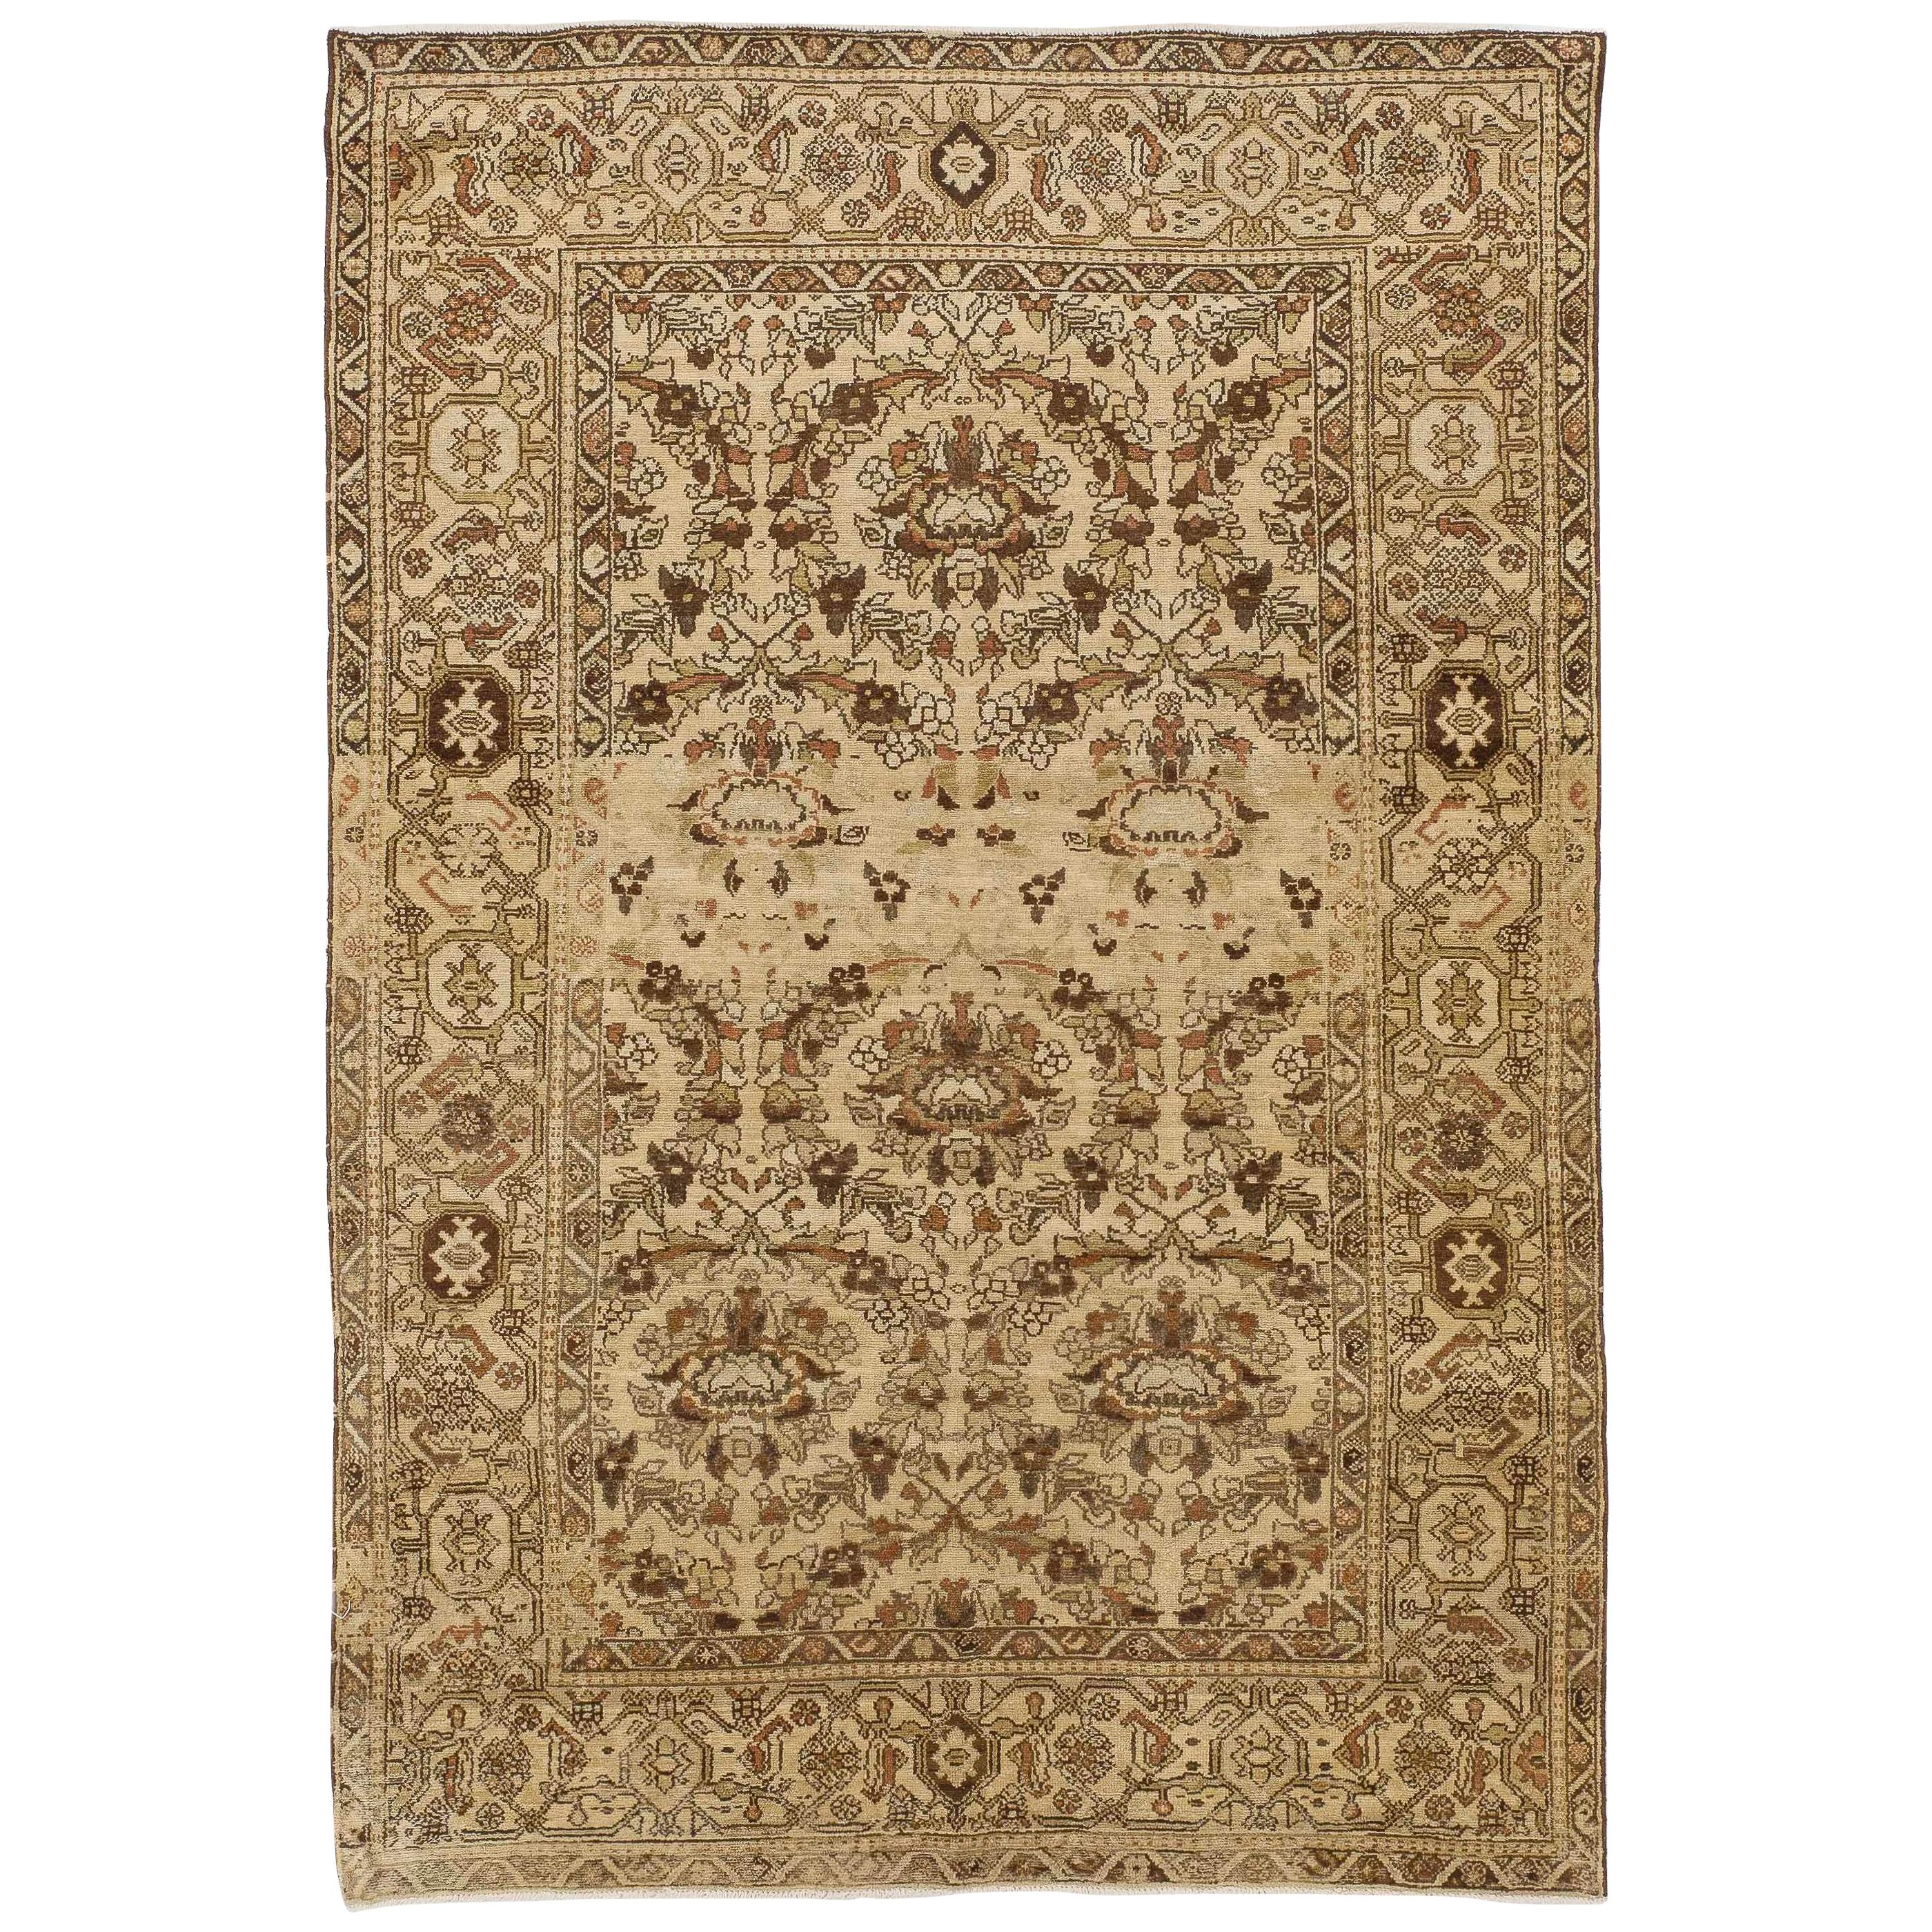 Antique Persian Malayer Rug with Brown and Black Floral Details on Ivory Field